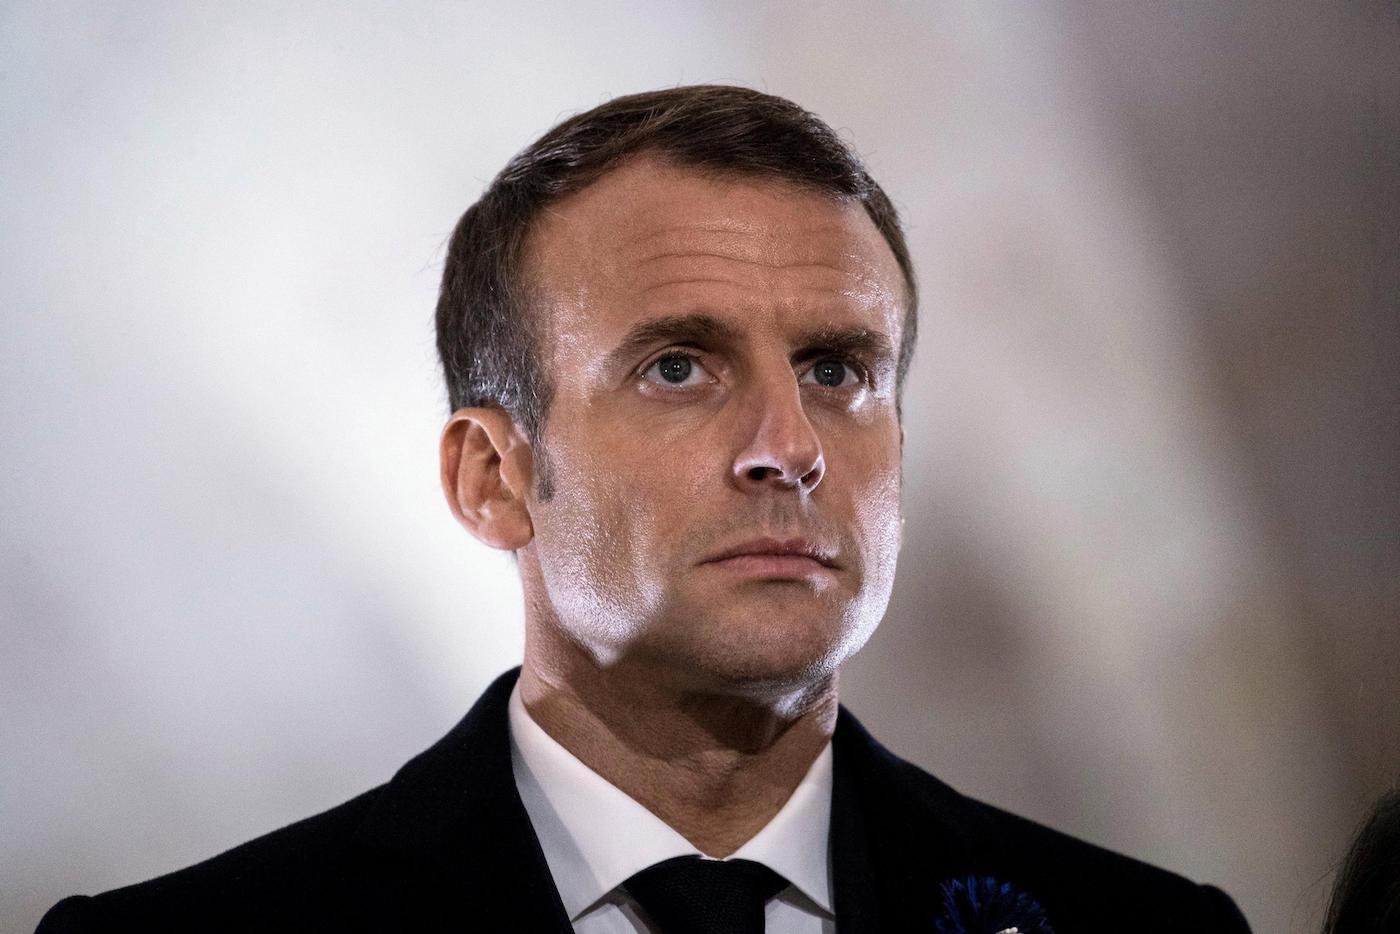 Emmanuel Macron plans to cut social networks in the event of a serious crisis